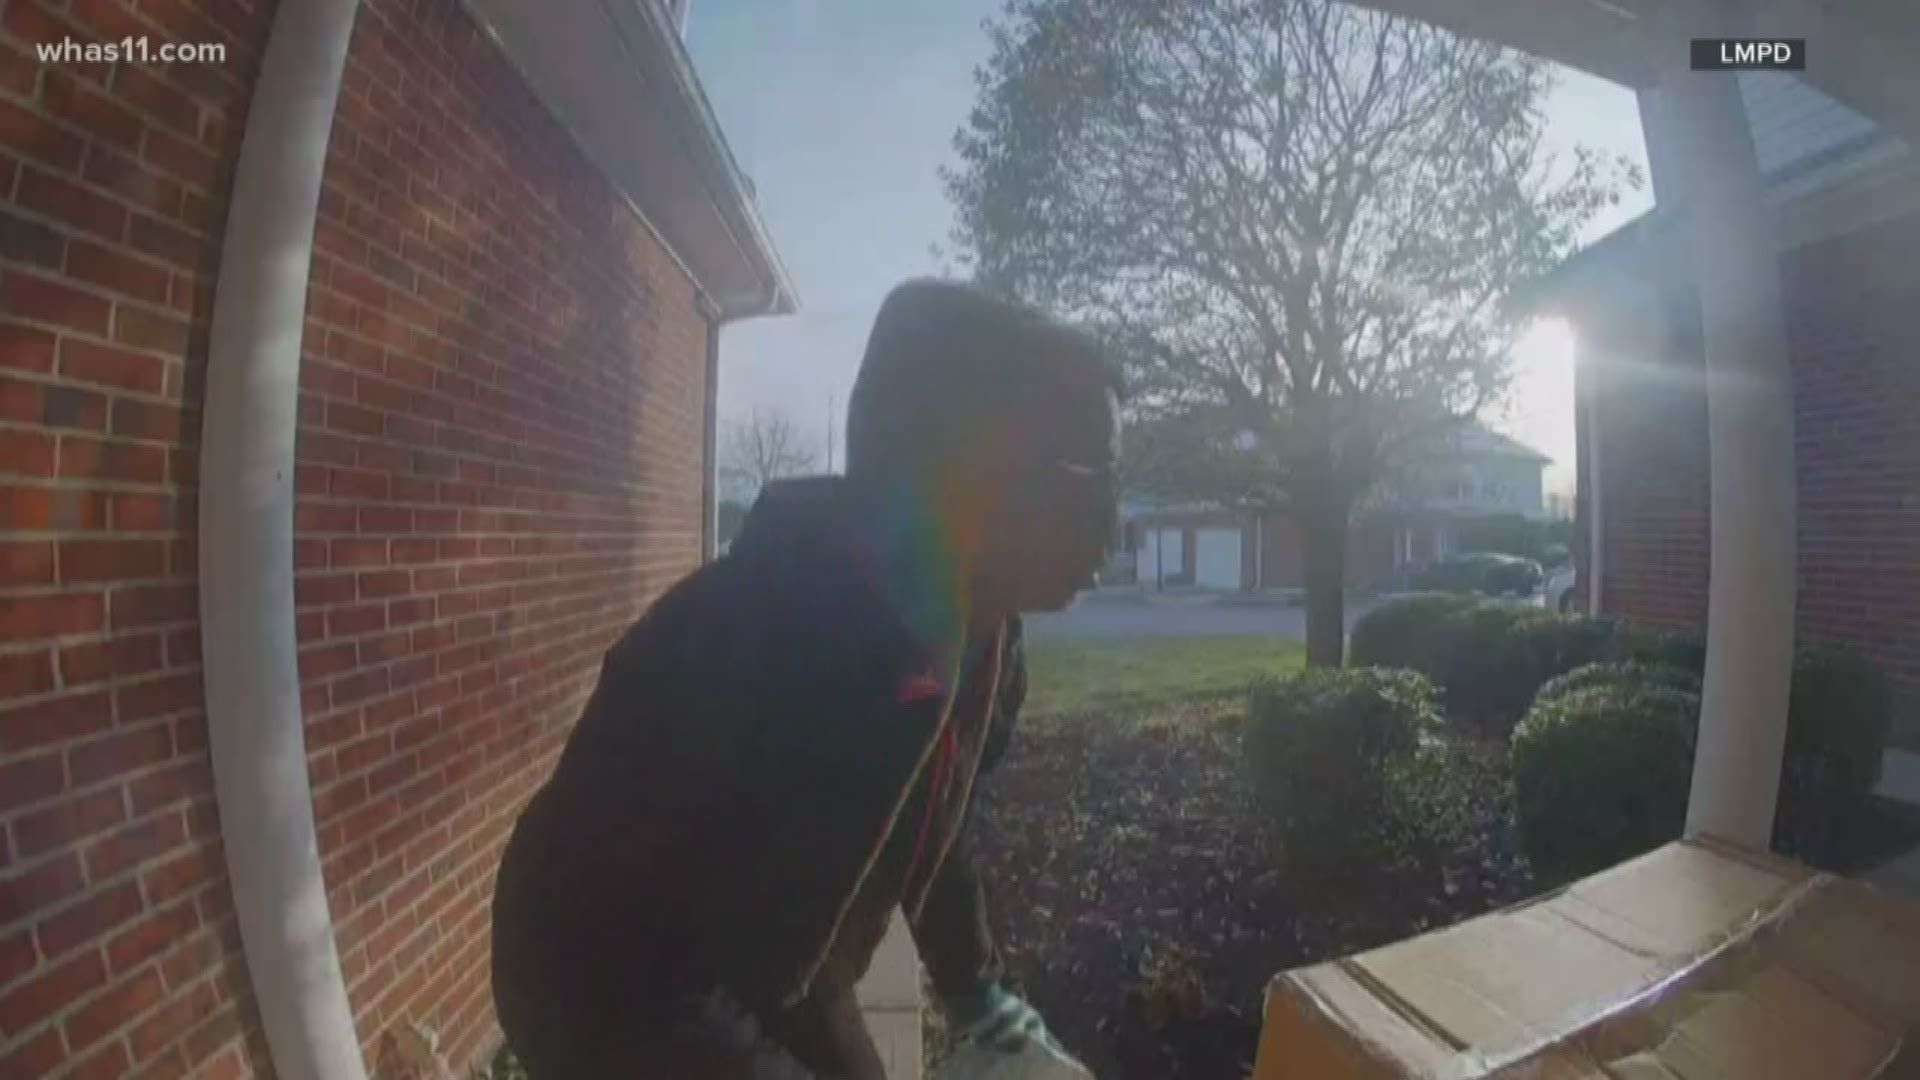 A porch pirate stealing packages from several homes in Eastern Jefferson County.